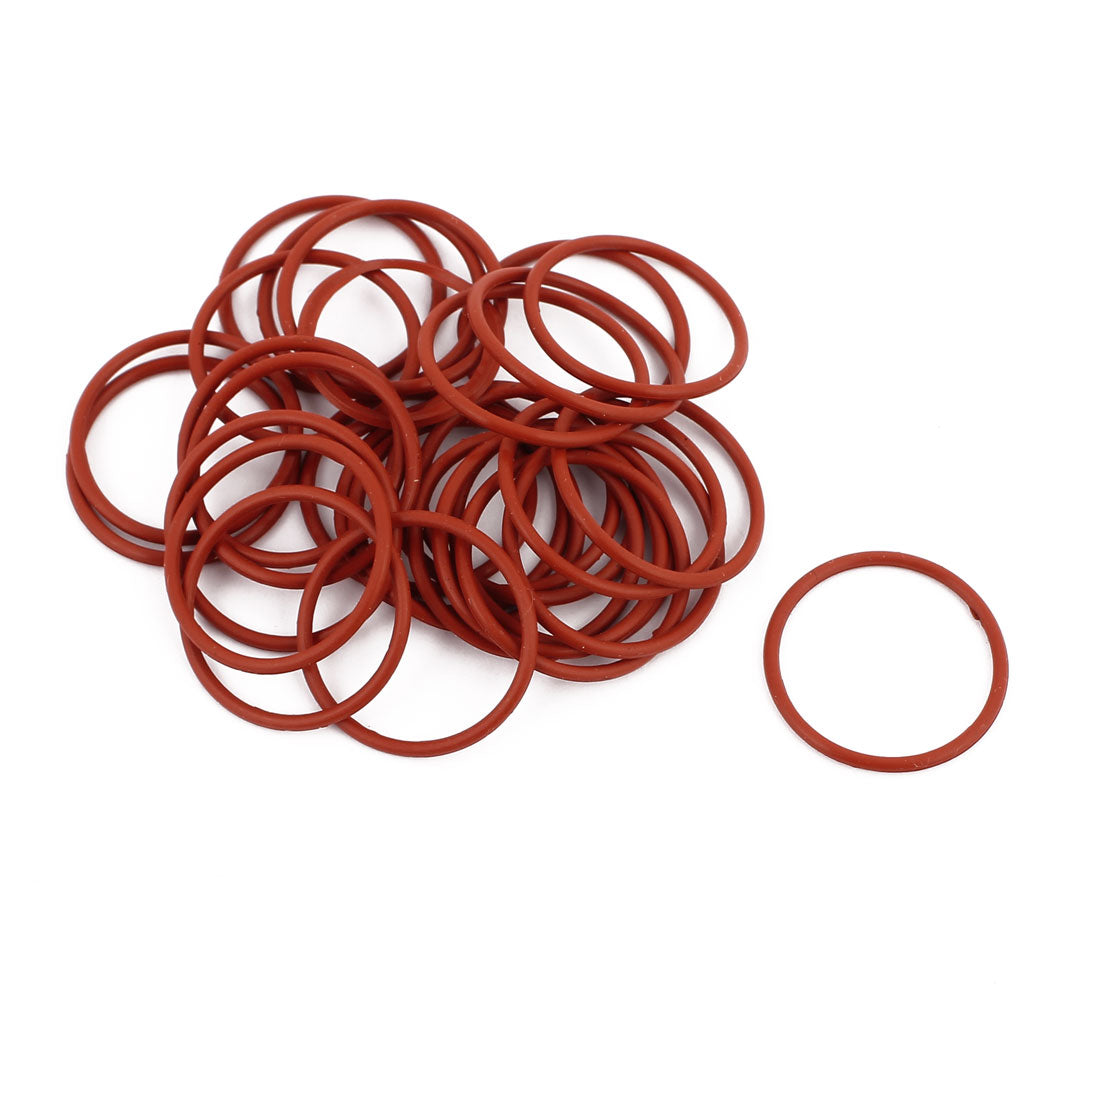 uxcell Uxcell 20Pcs 25mm x 1.5mm Rubber O-rings NBR Heat Resistant Sealing Ring Grommets Red